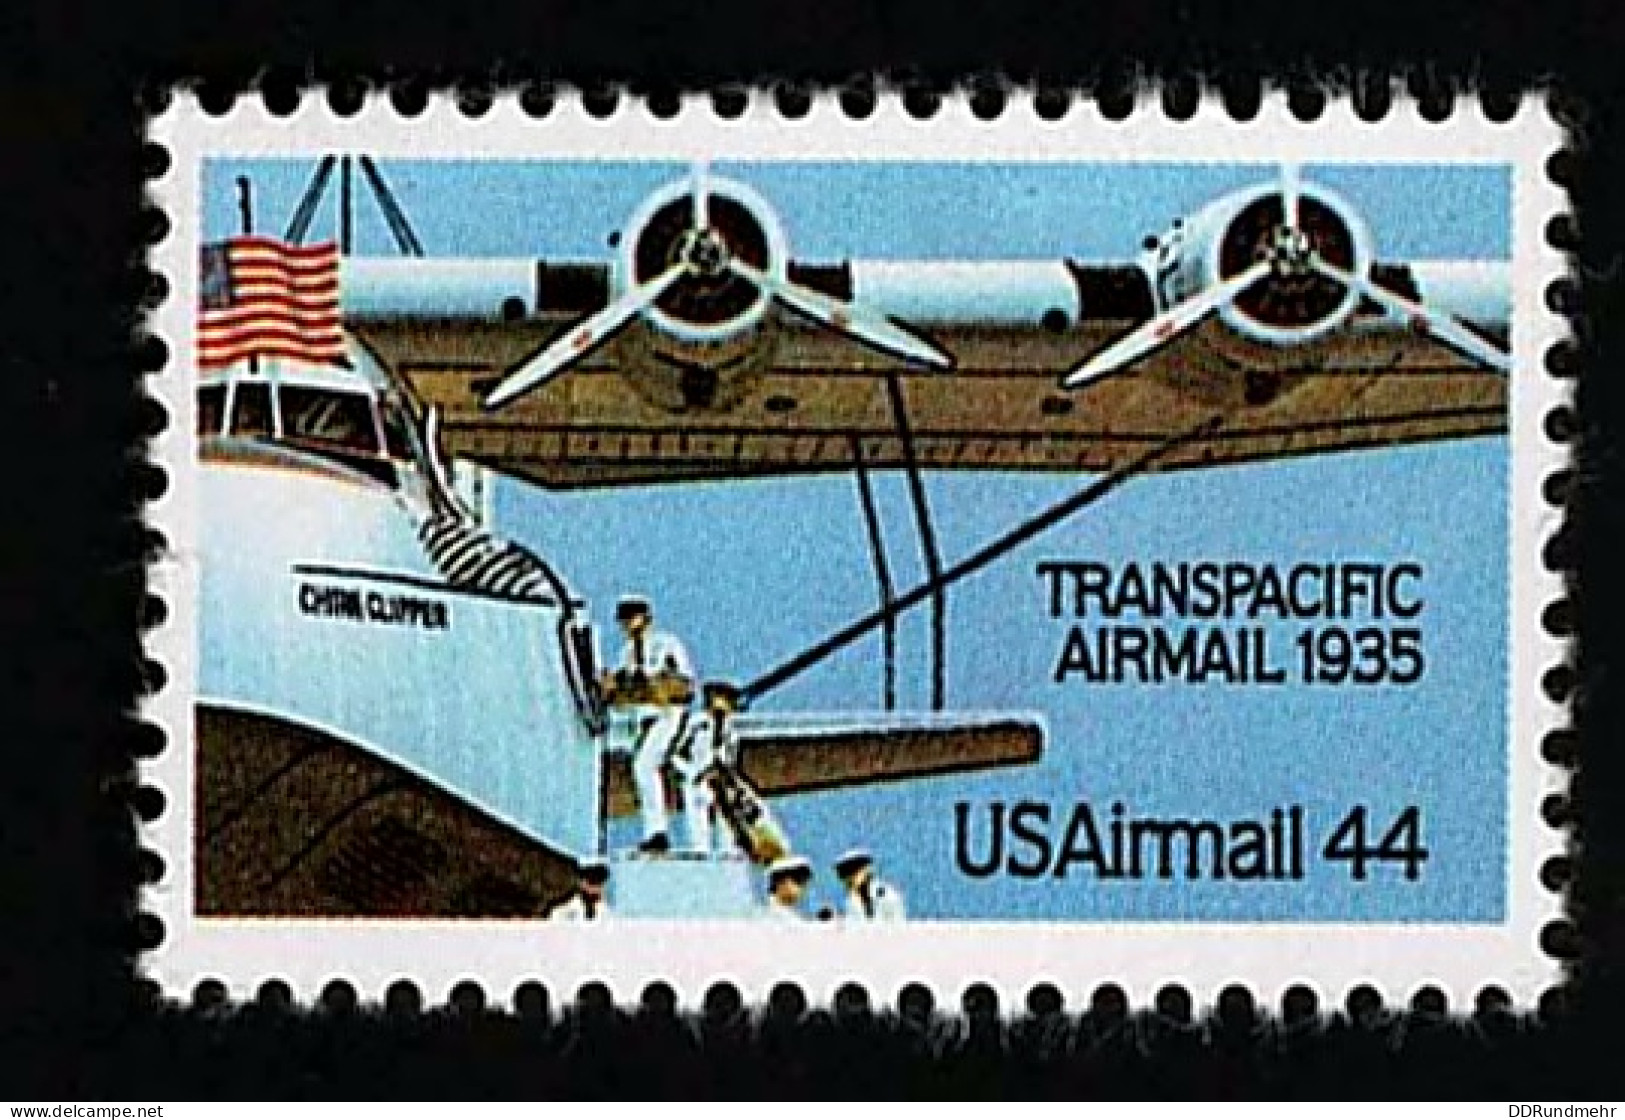 1985 China Clipper Michel US 1727 Stamp Number US C115 Yvert Et Tellier US PA109 Stanley Gibbons US A2144 Xx MNH - 3b. 1961-... Neufs